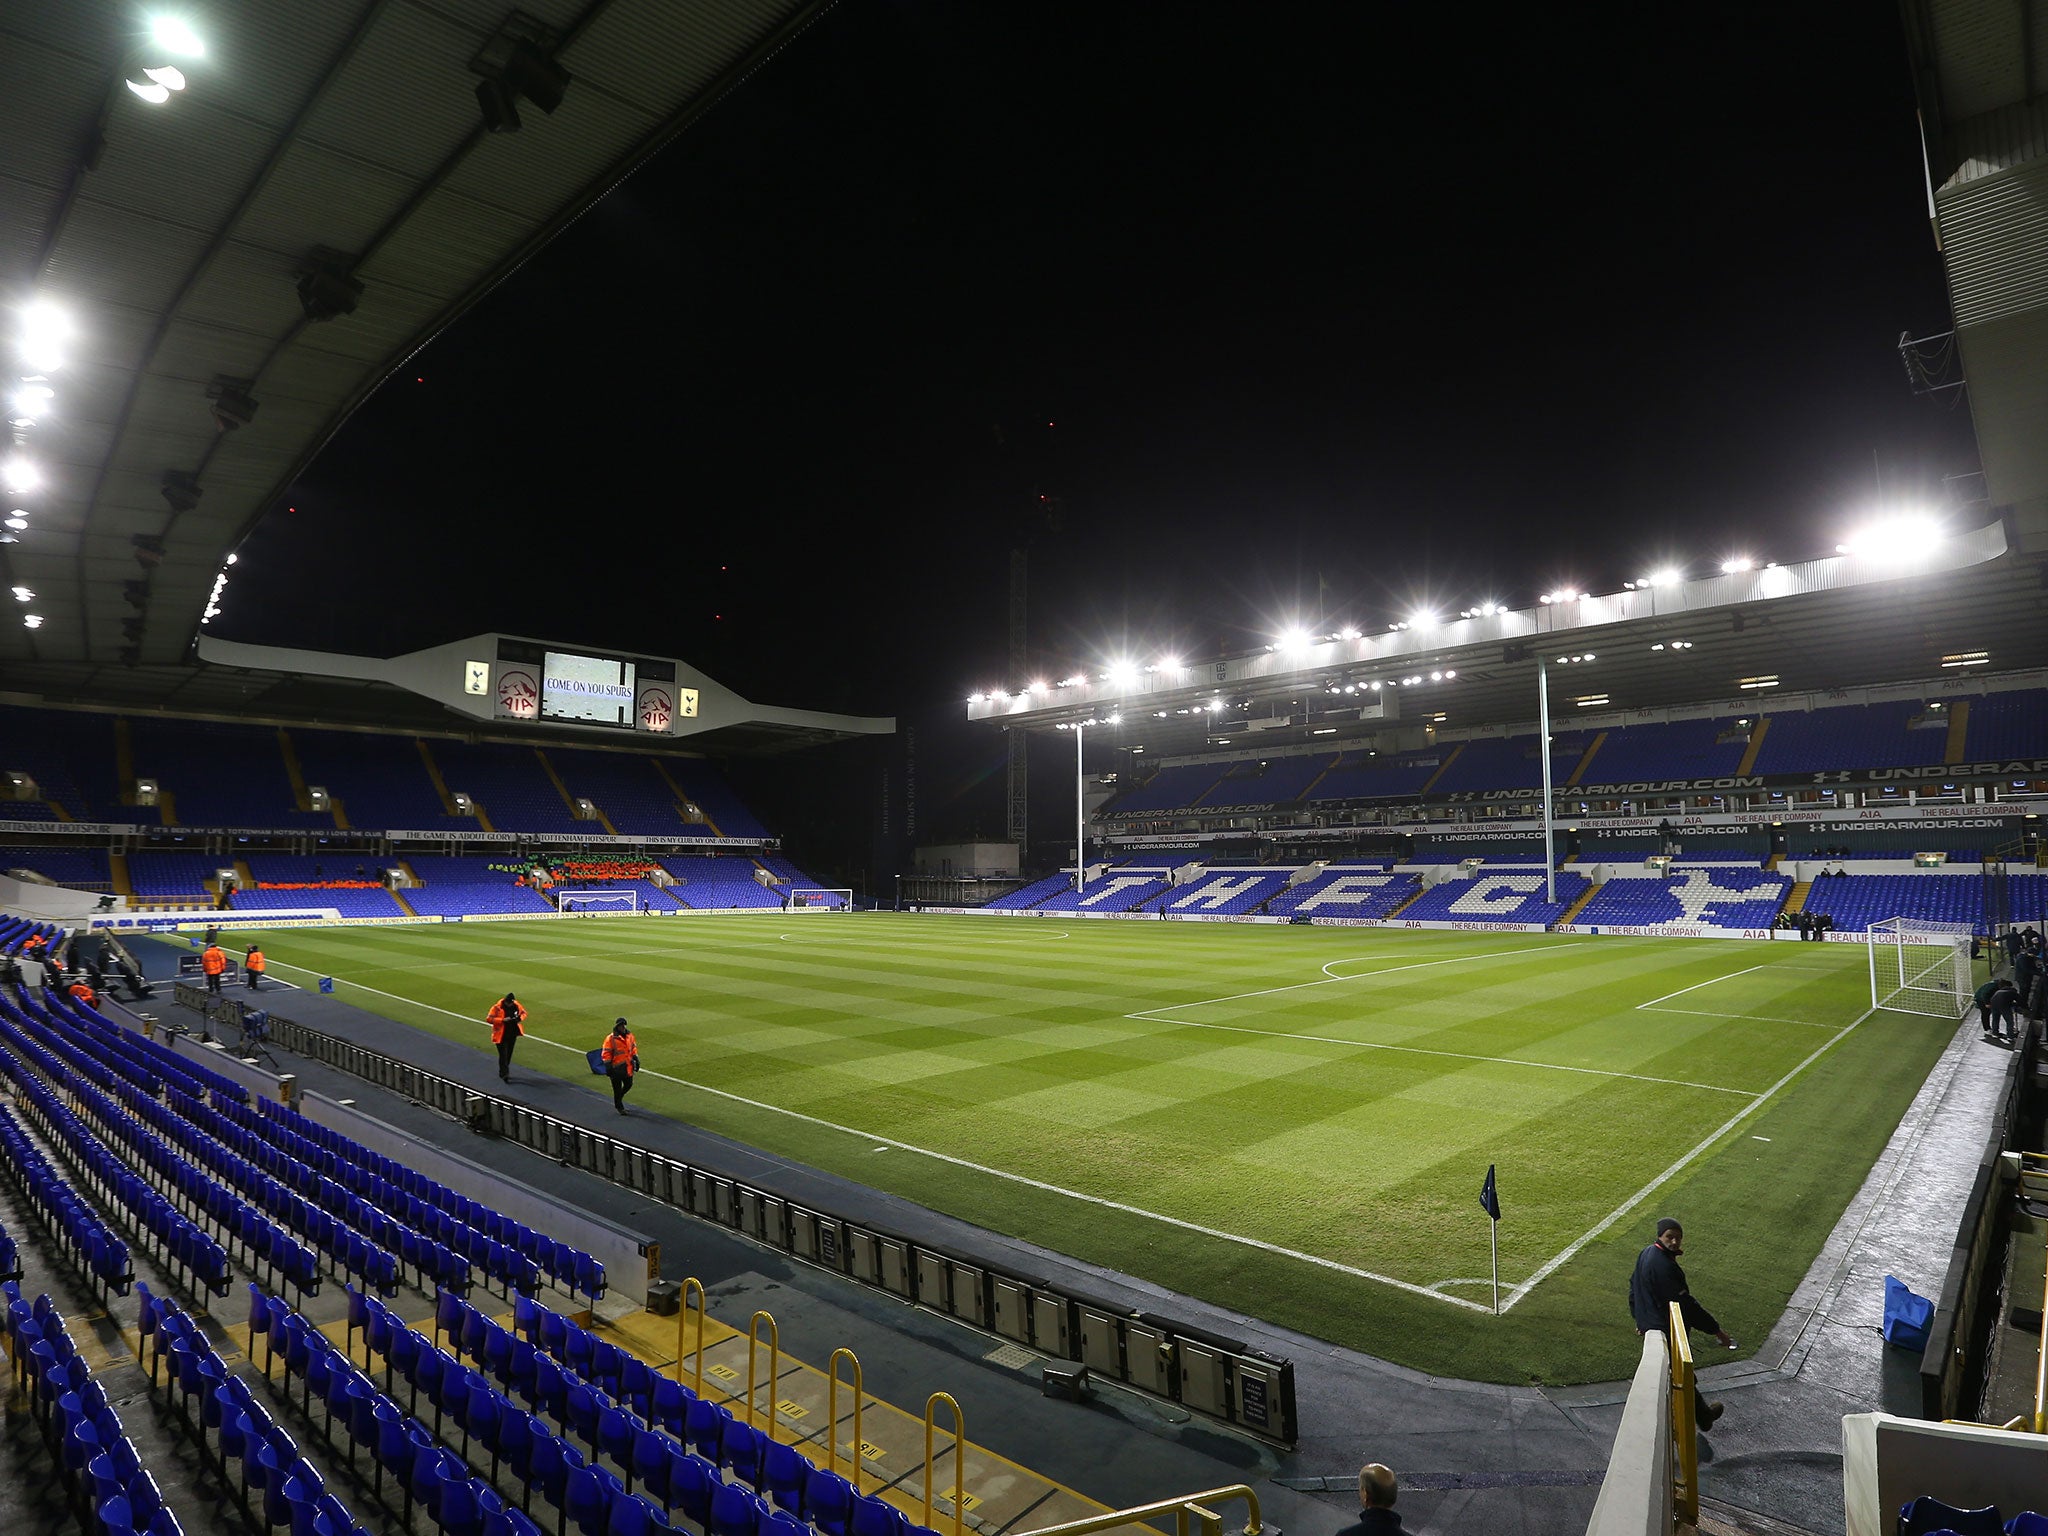 Spurs are restructuring their operations and also their ground, White Hart Lane